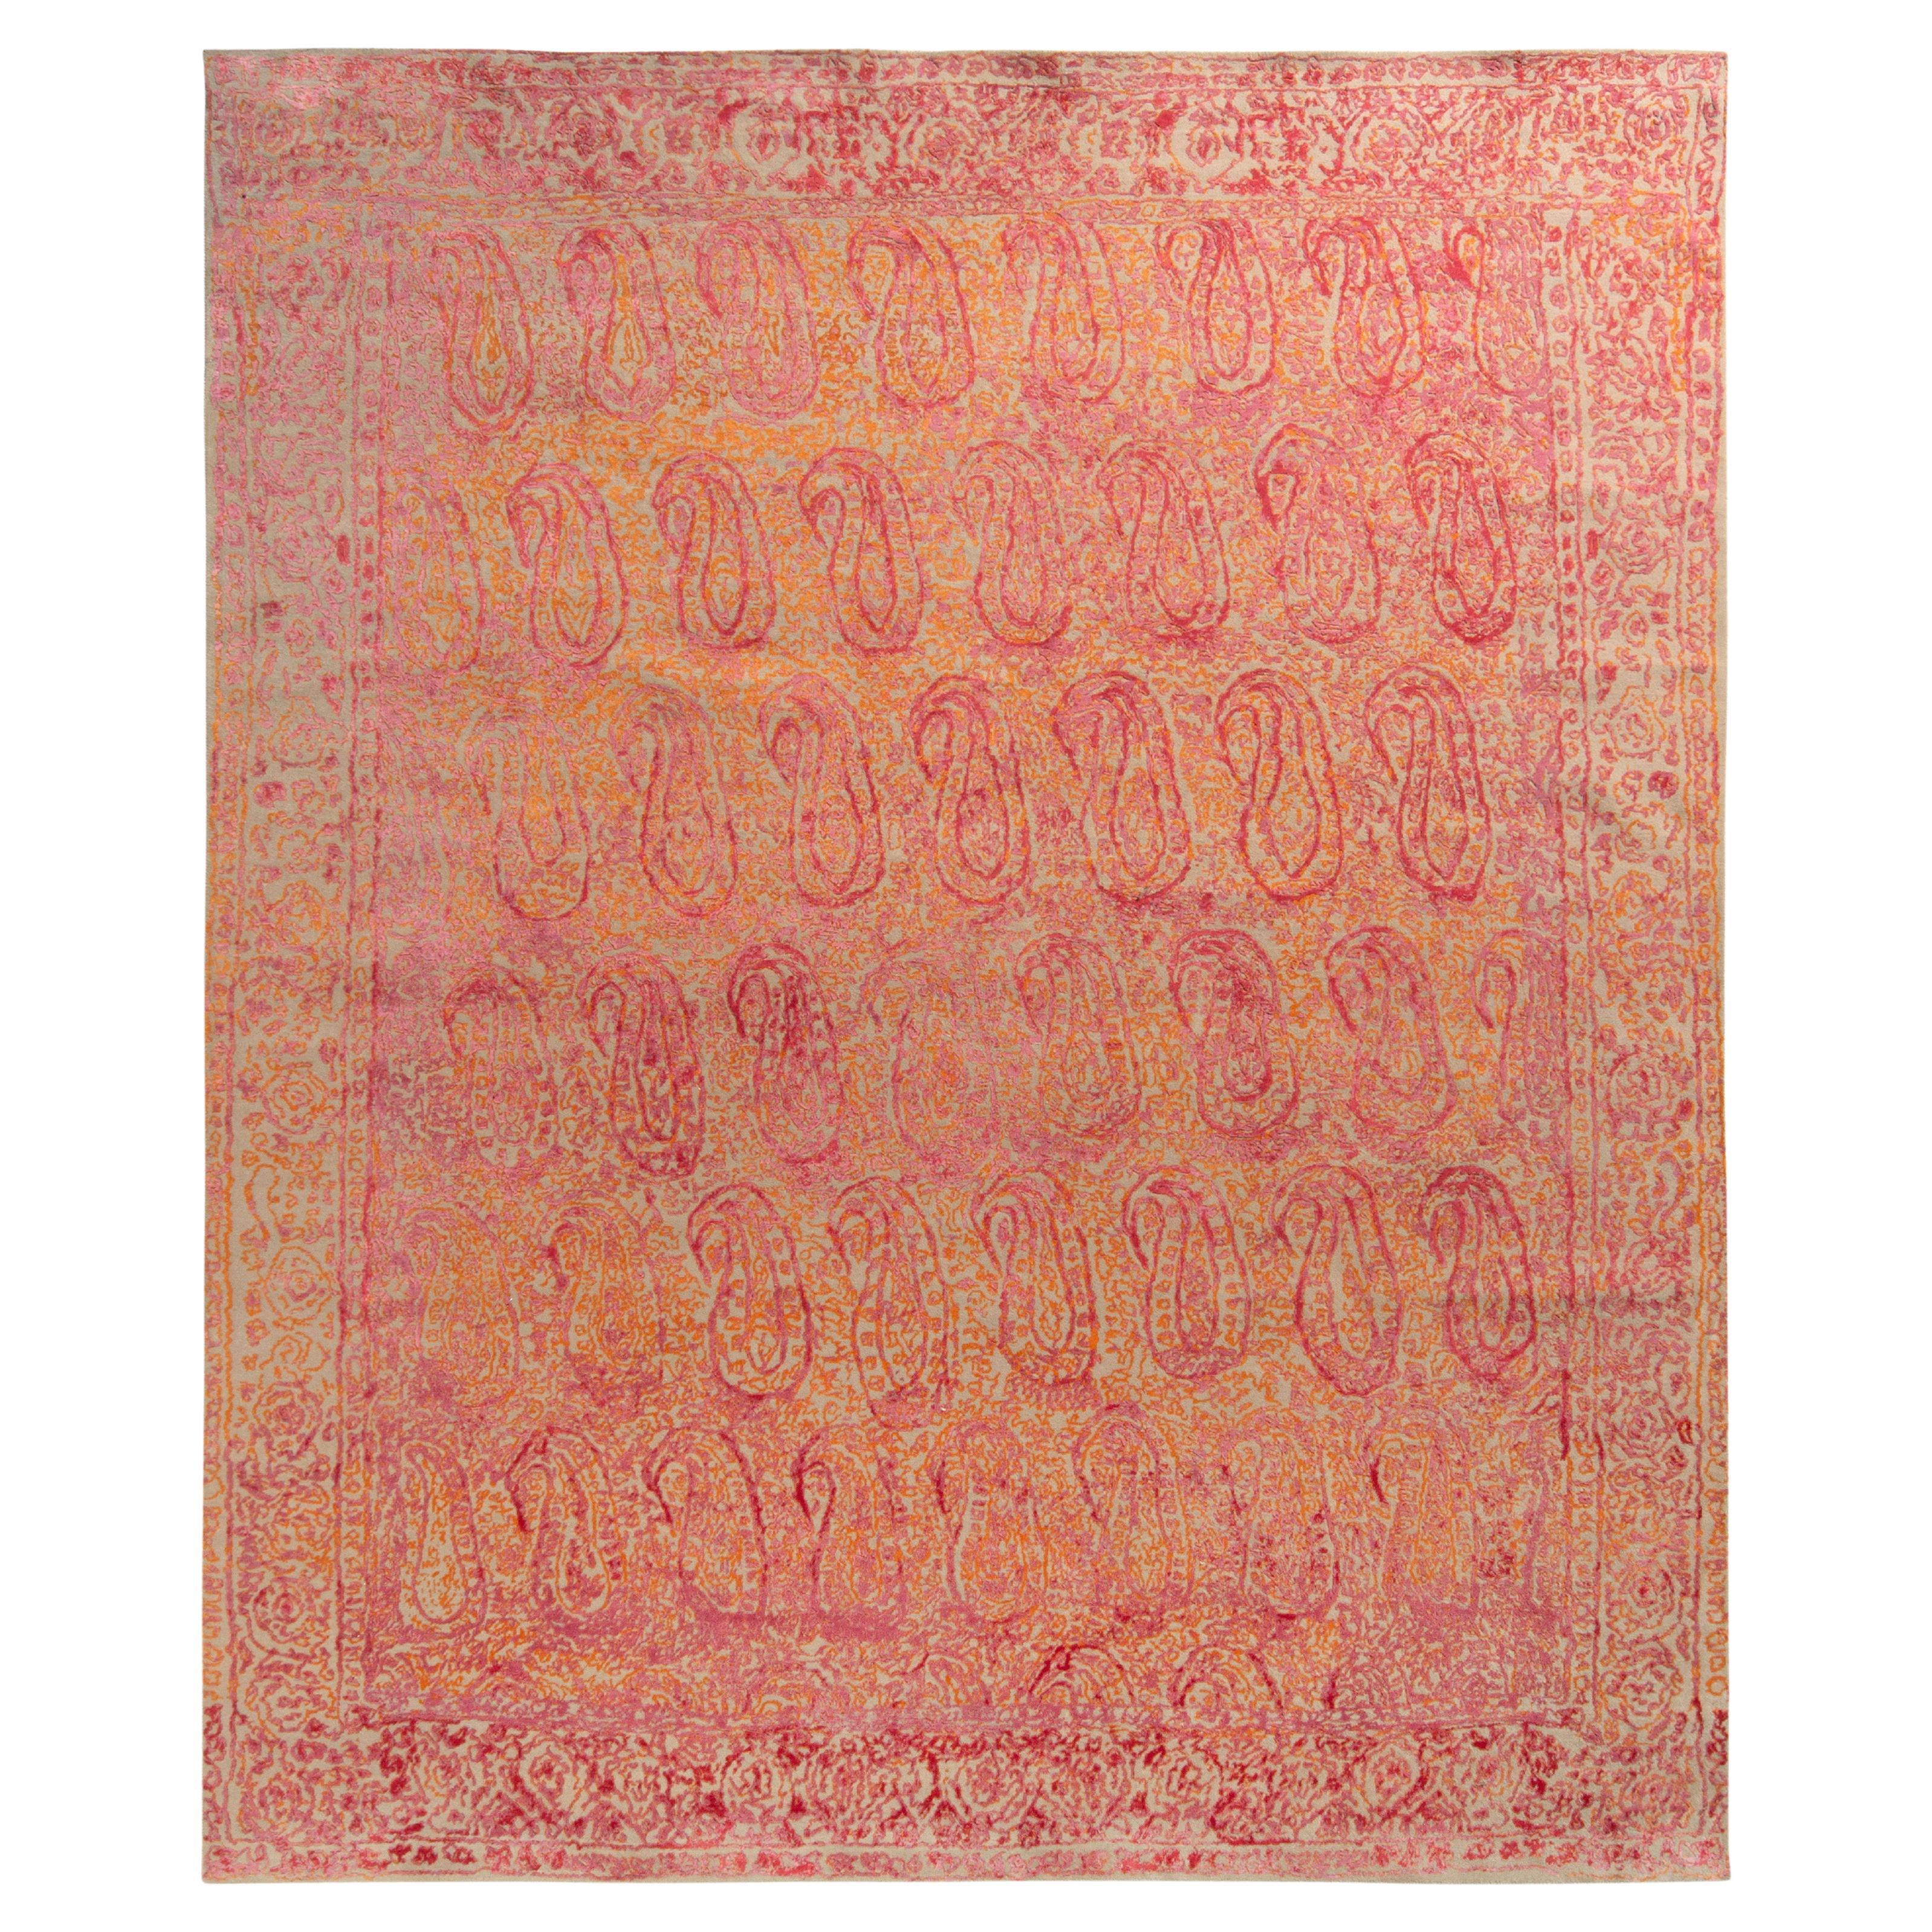 Rug & Kilim’s Paisley Style Transitional Rug in Red, Orange, Pink Floral Pattern